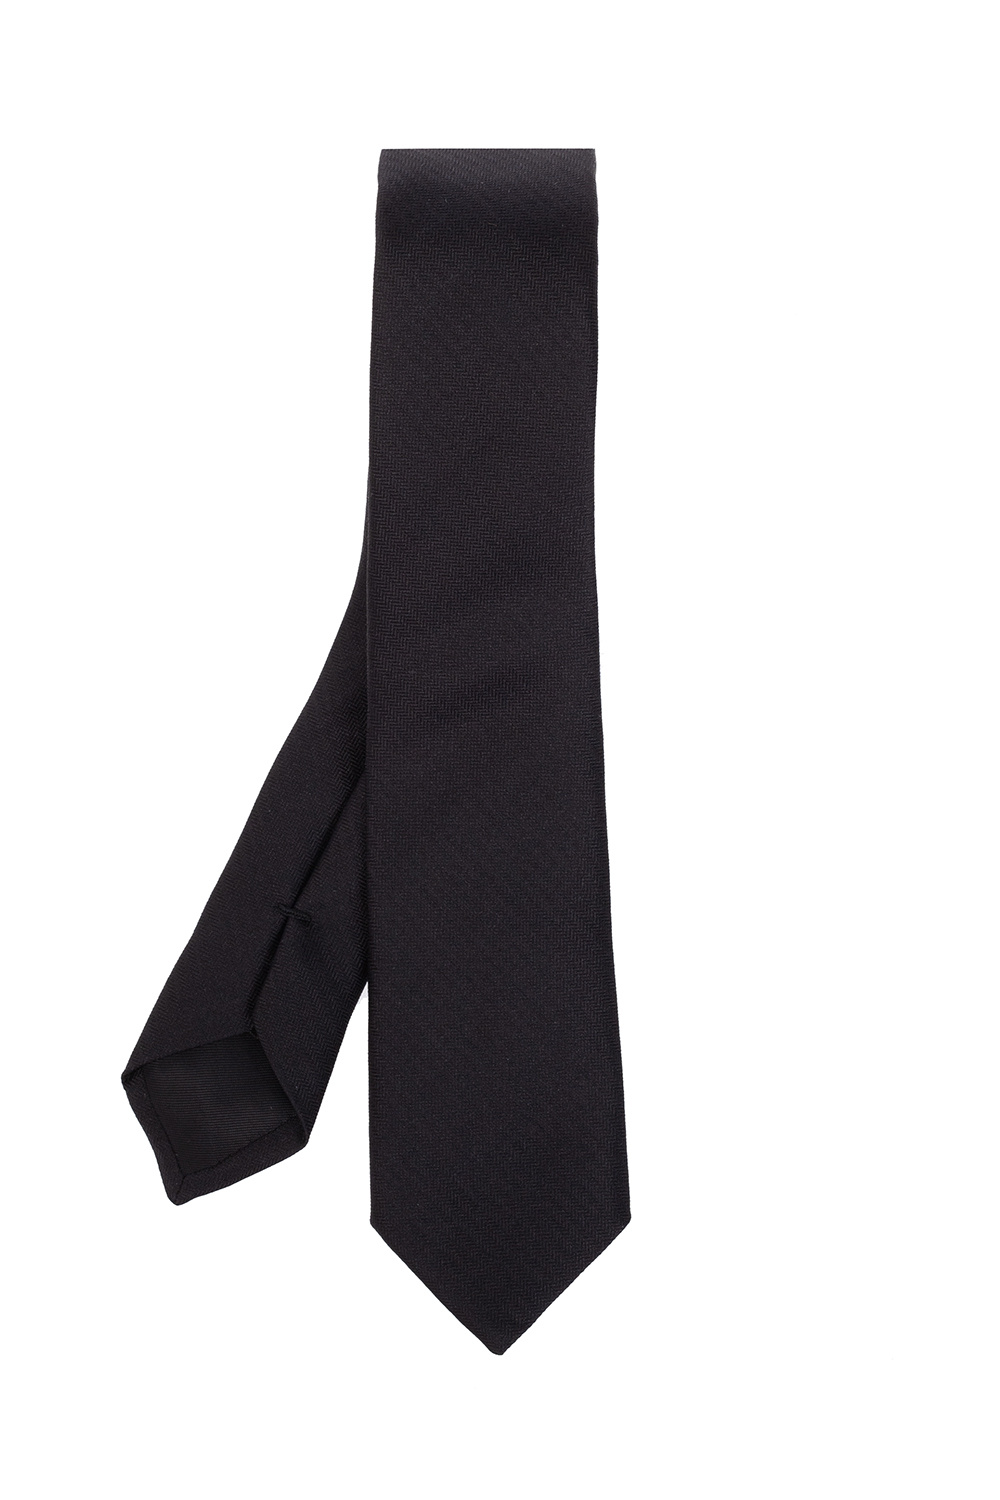 Givenchy sistible tie